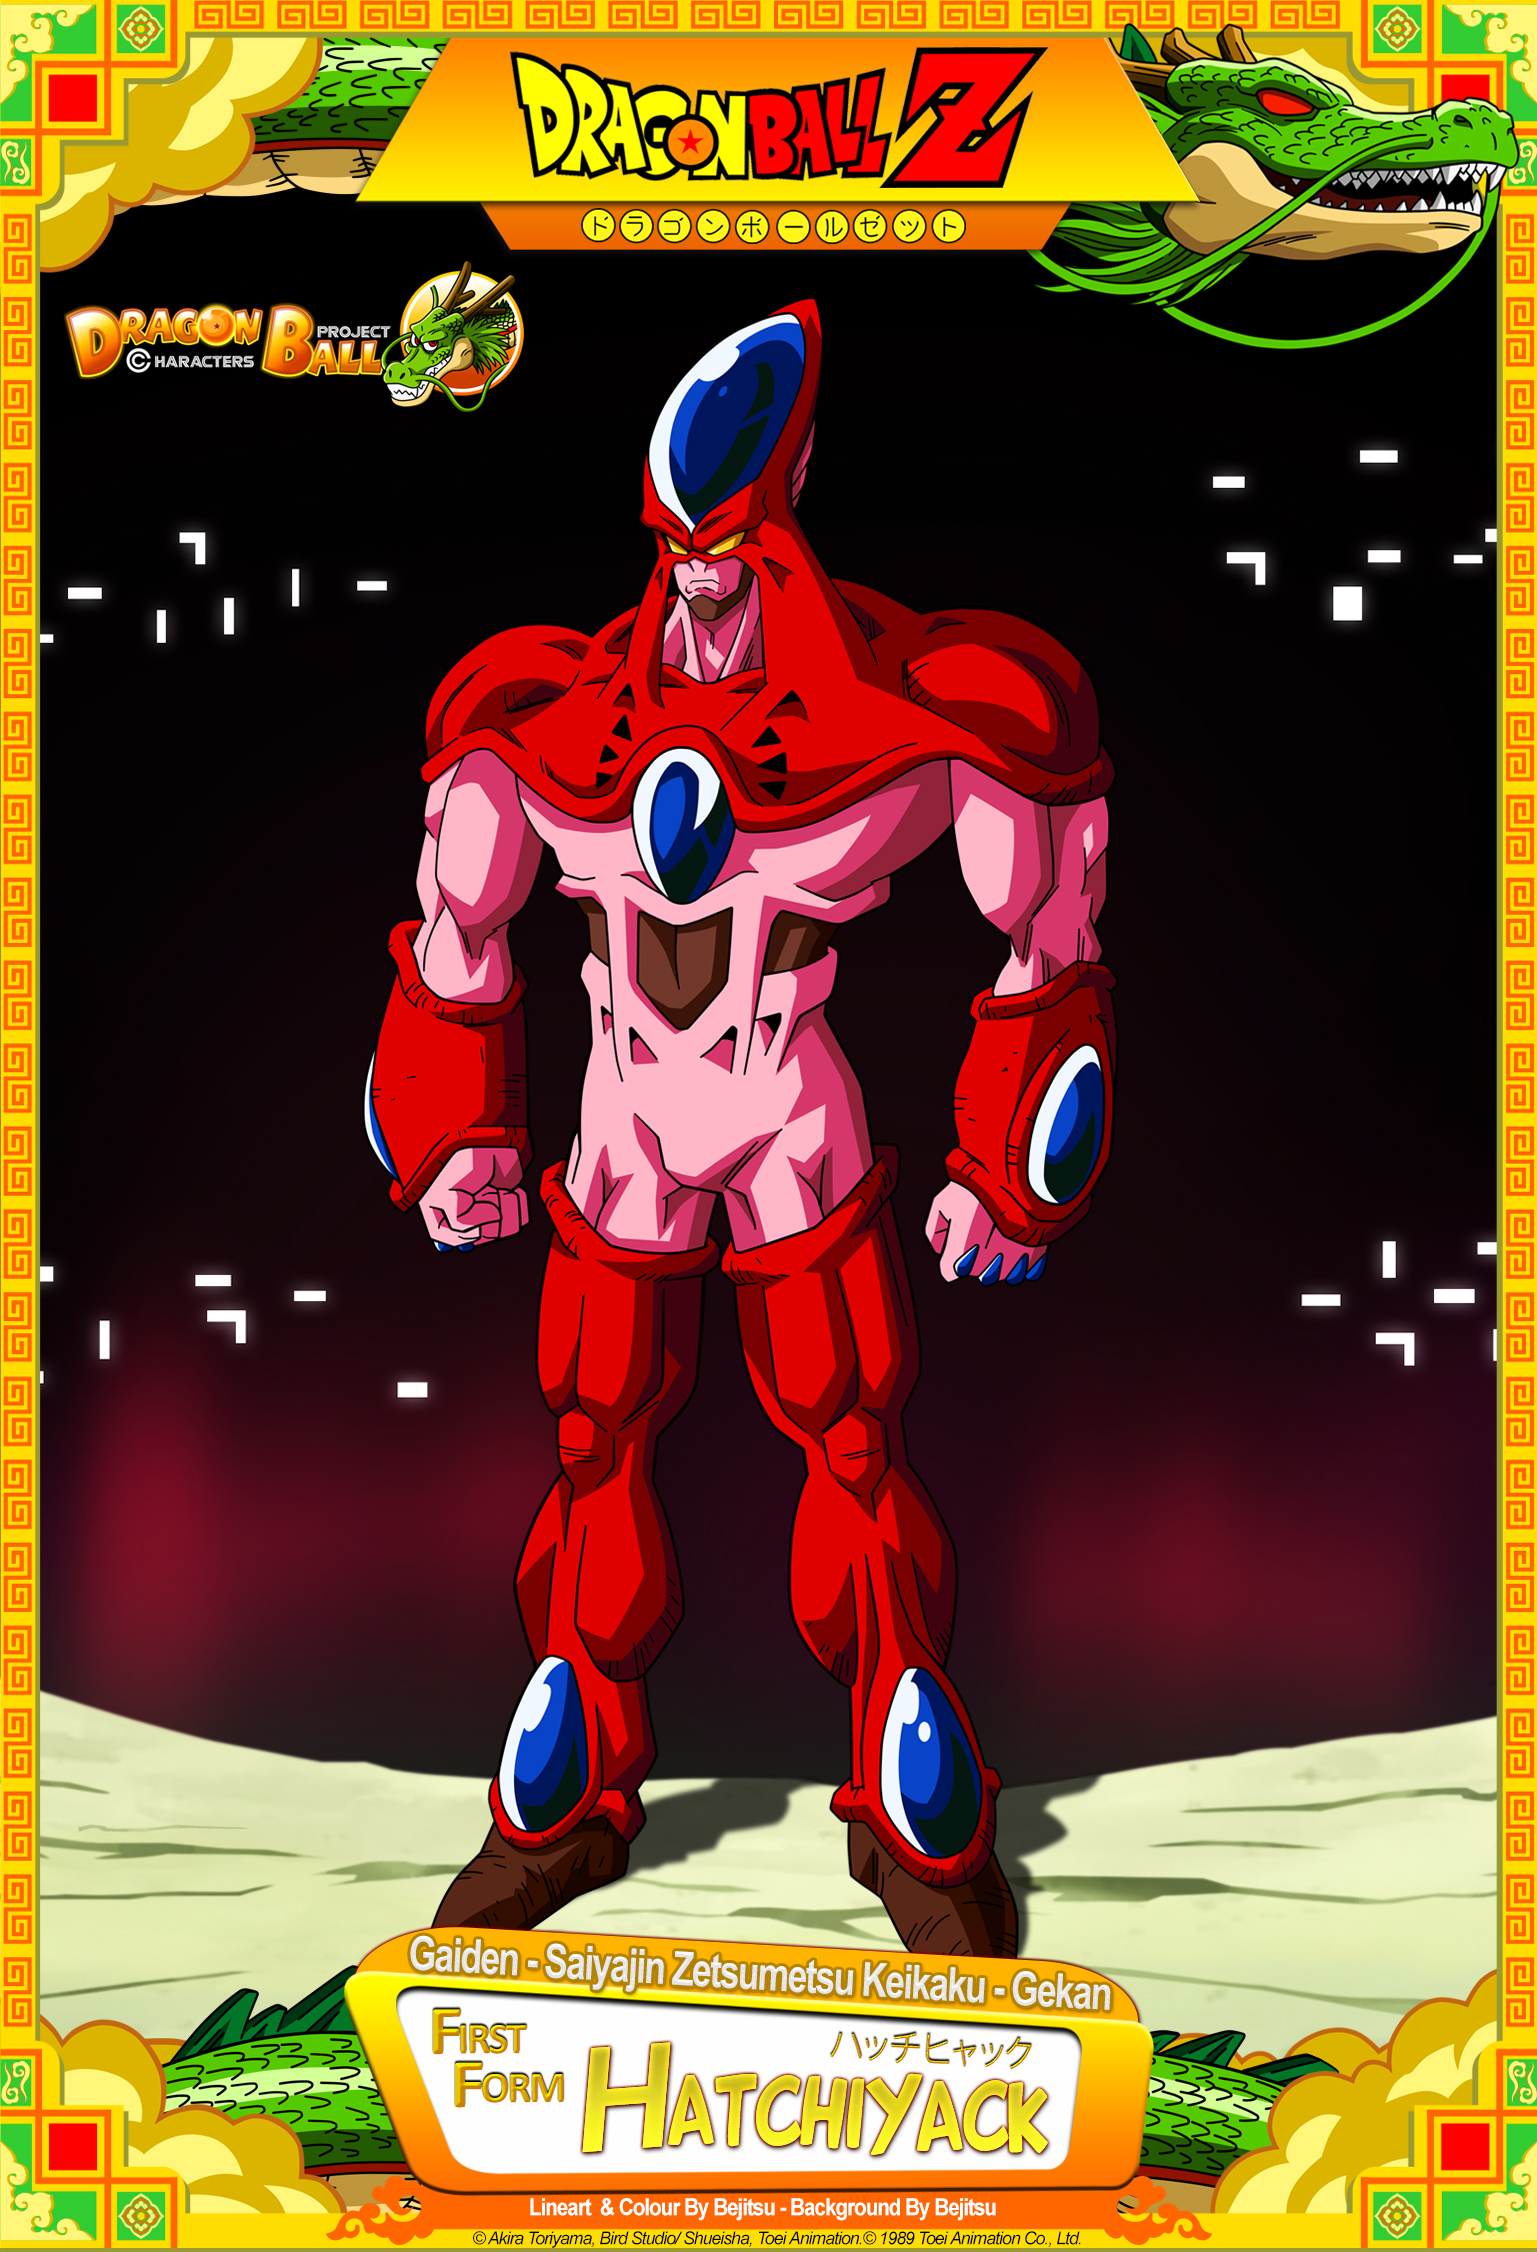 Dragon Ball Z Hatchiyack Update By Dbcproject On Deviantart